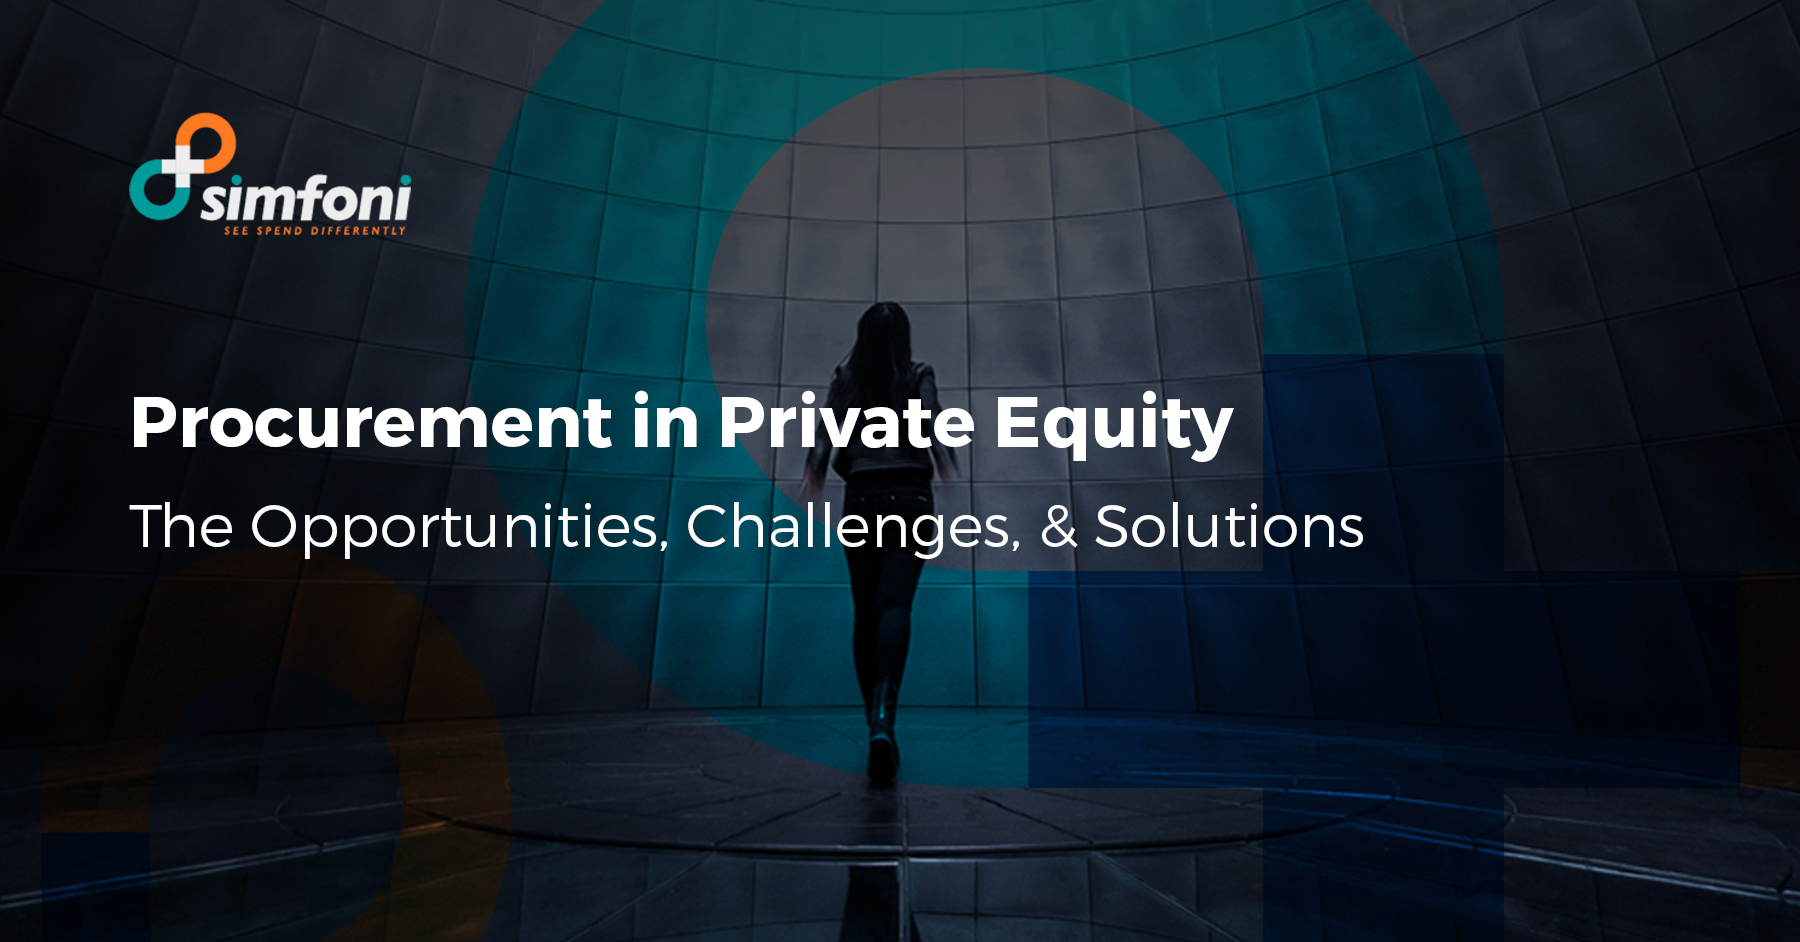 Procurement in Private Equity: The Opportunities, Challenges, & Solutions